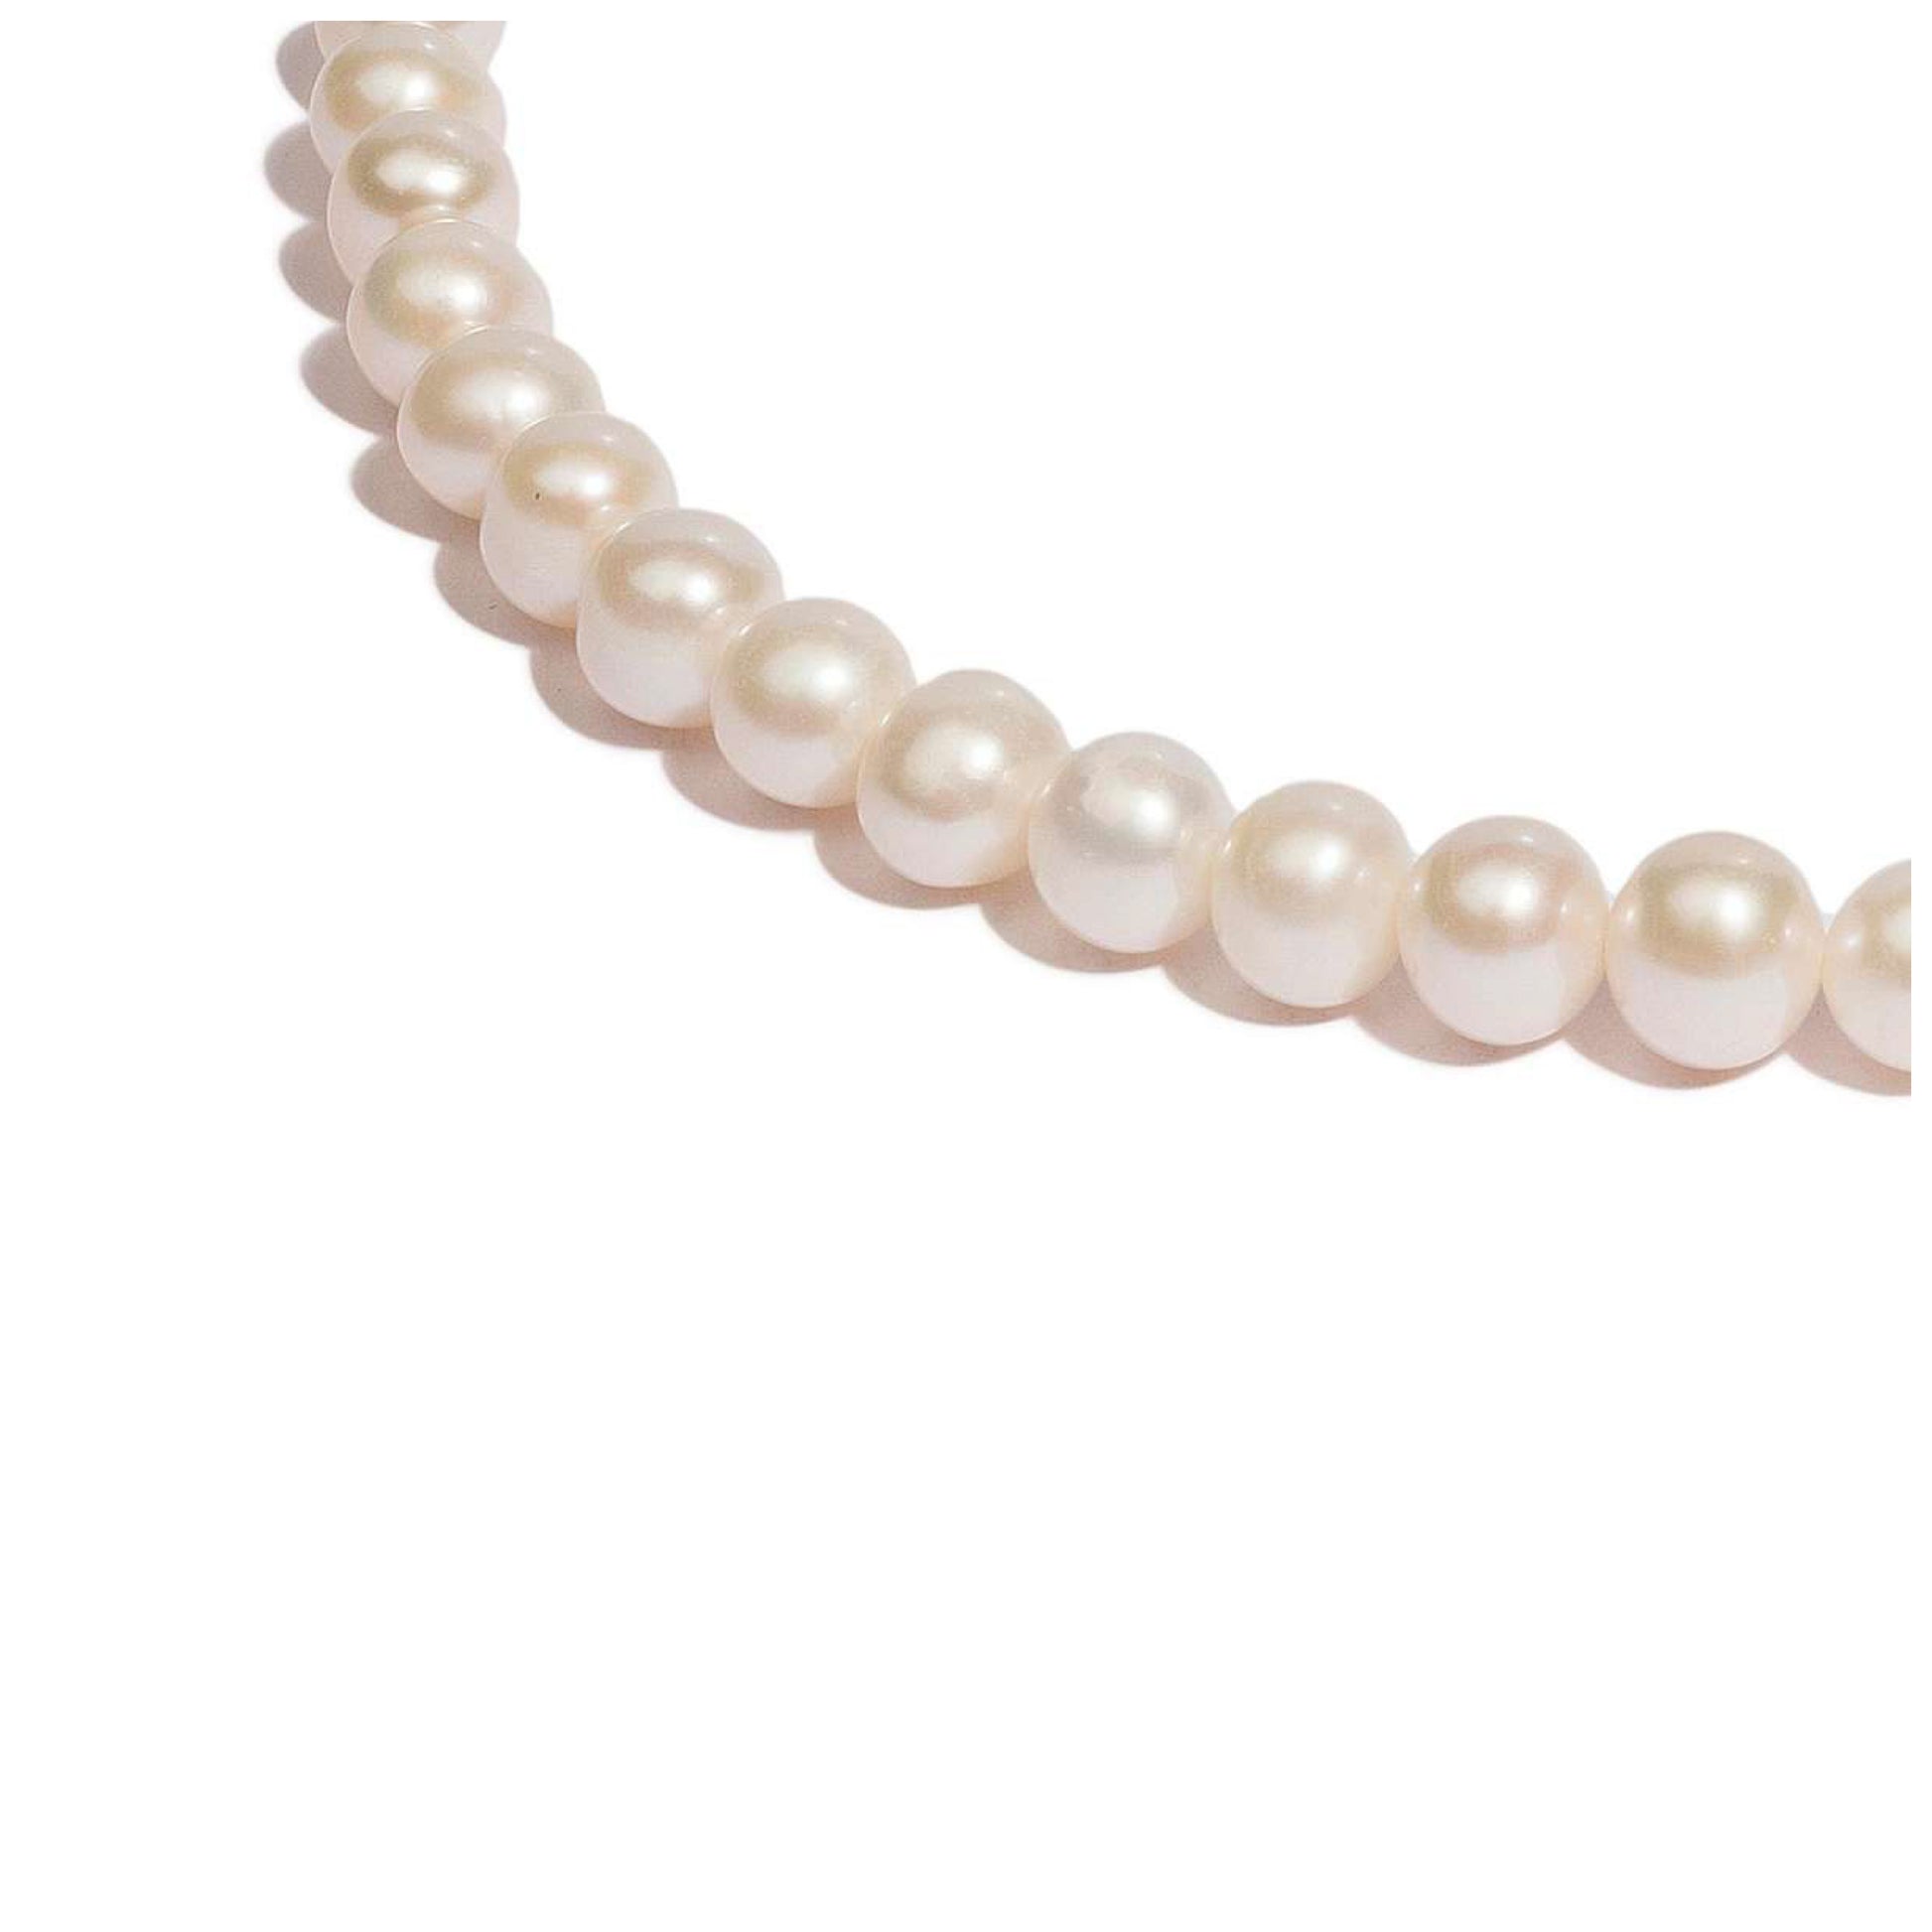 Cultured Freshwater Pearl Necklace - 8-9mm|42cm - John Ross Jewellers